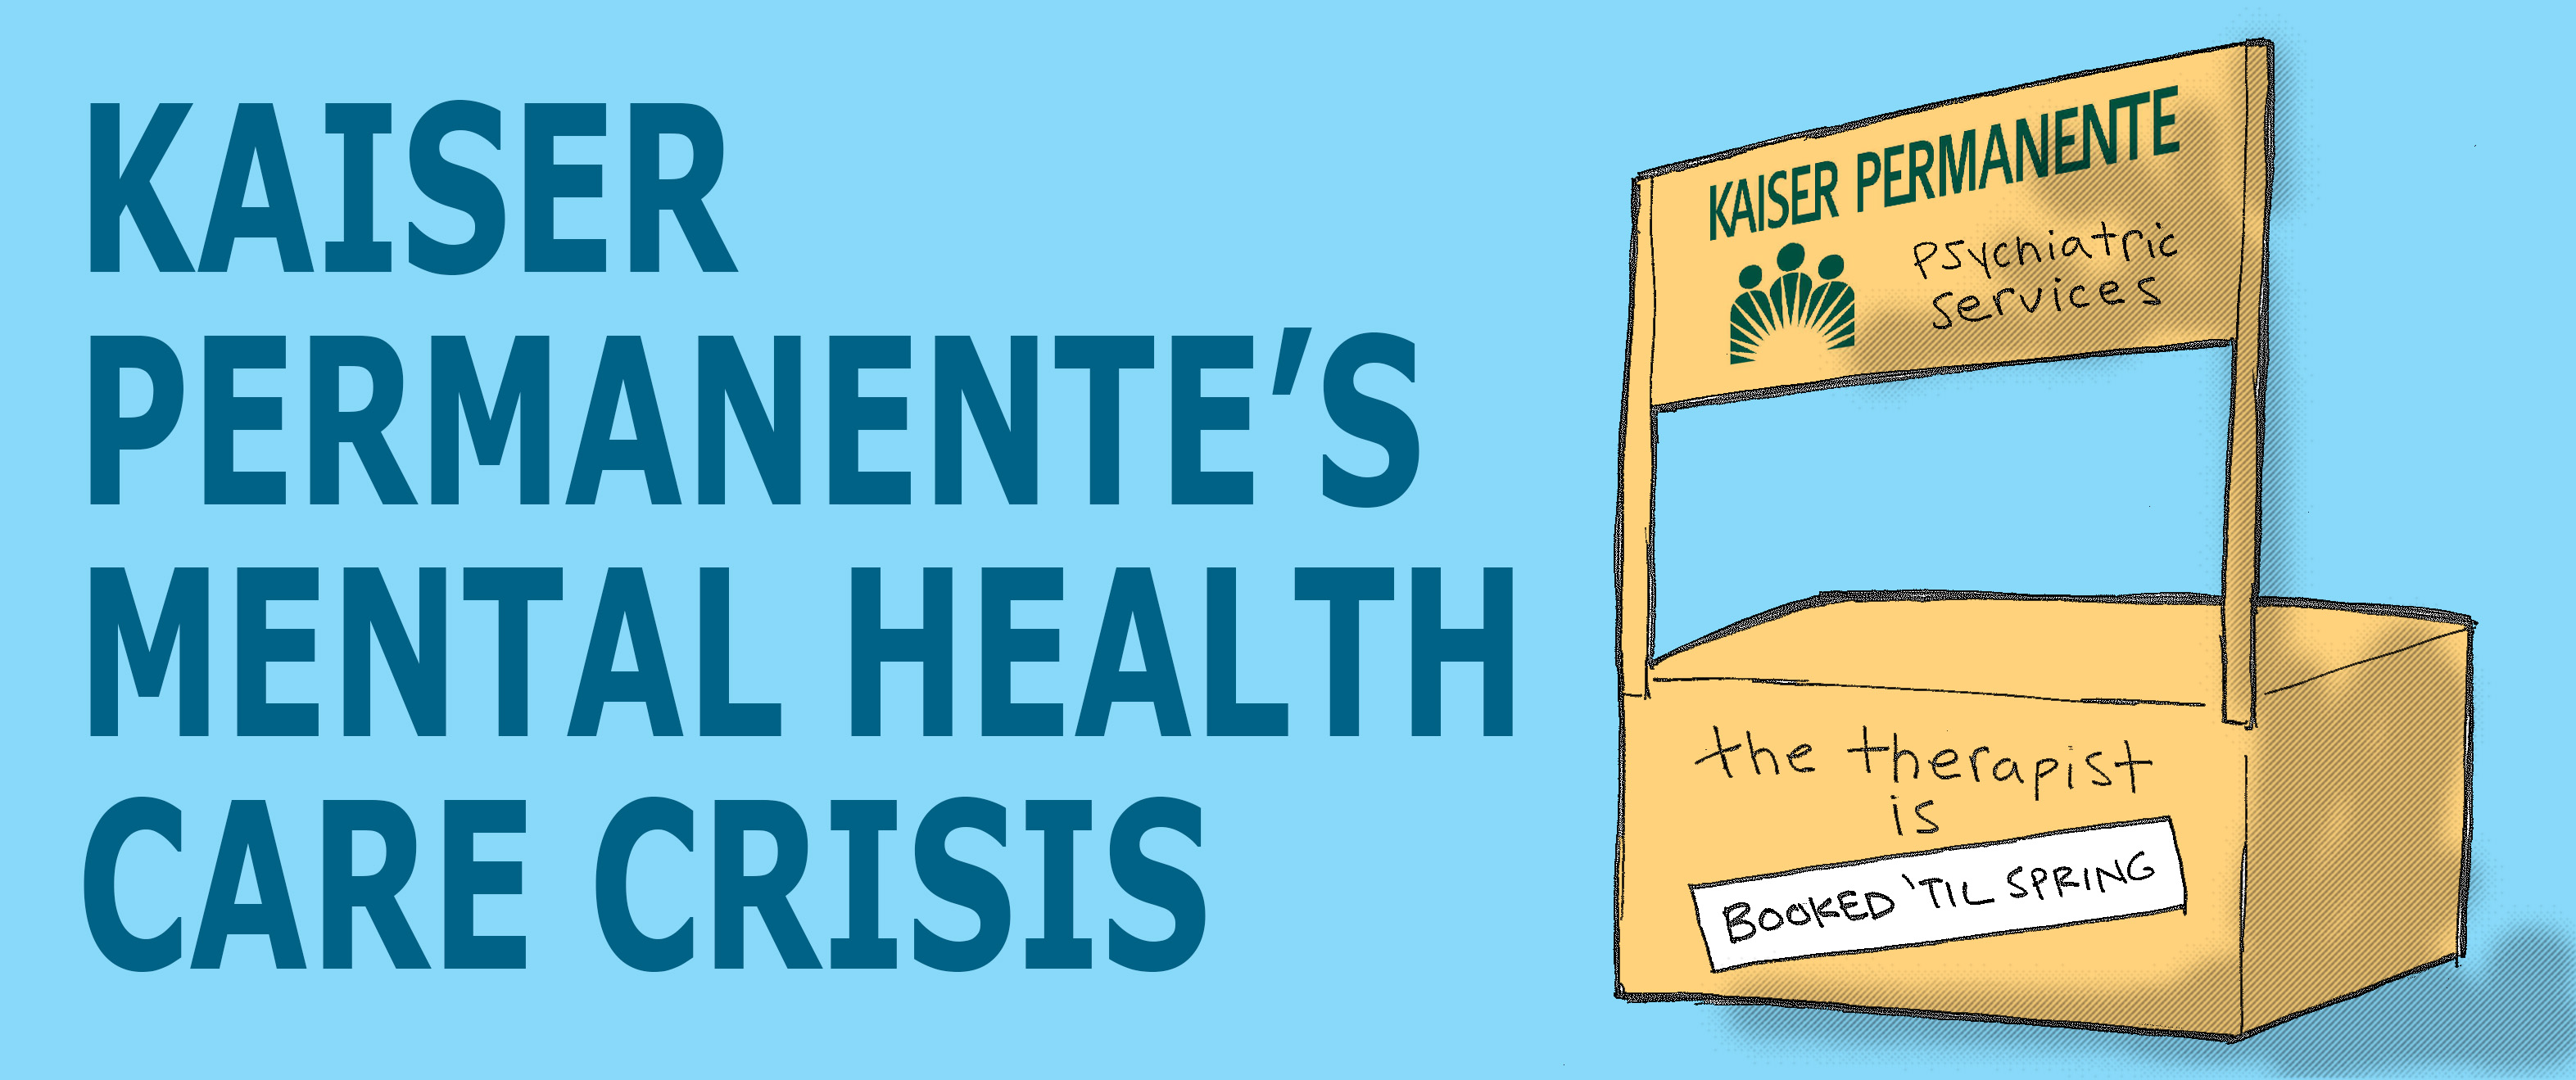 Kaiser Permanente Is Failing Its Mental Health Patients | HuffPost